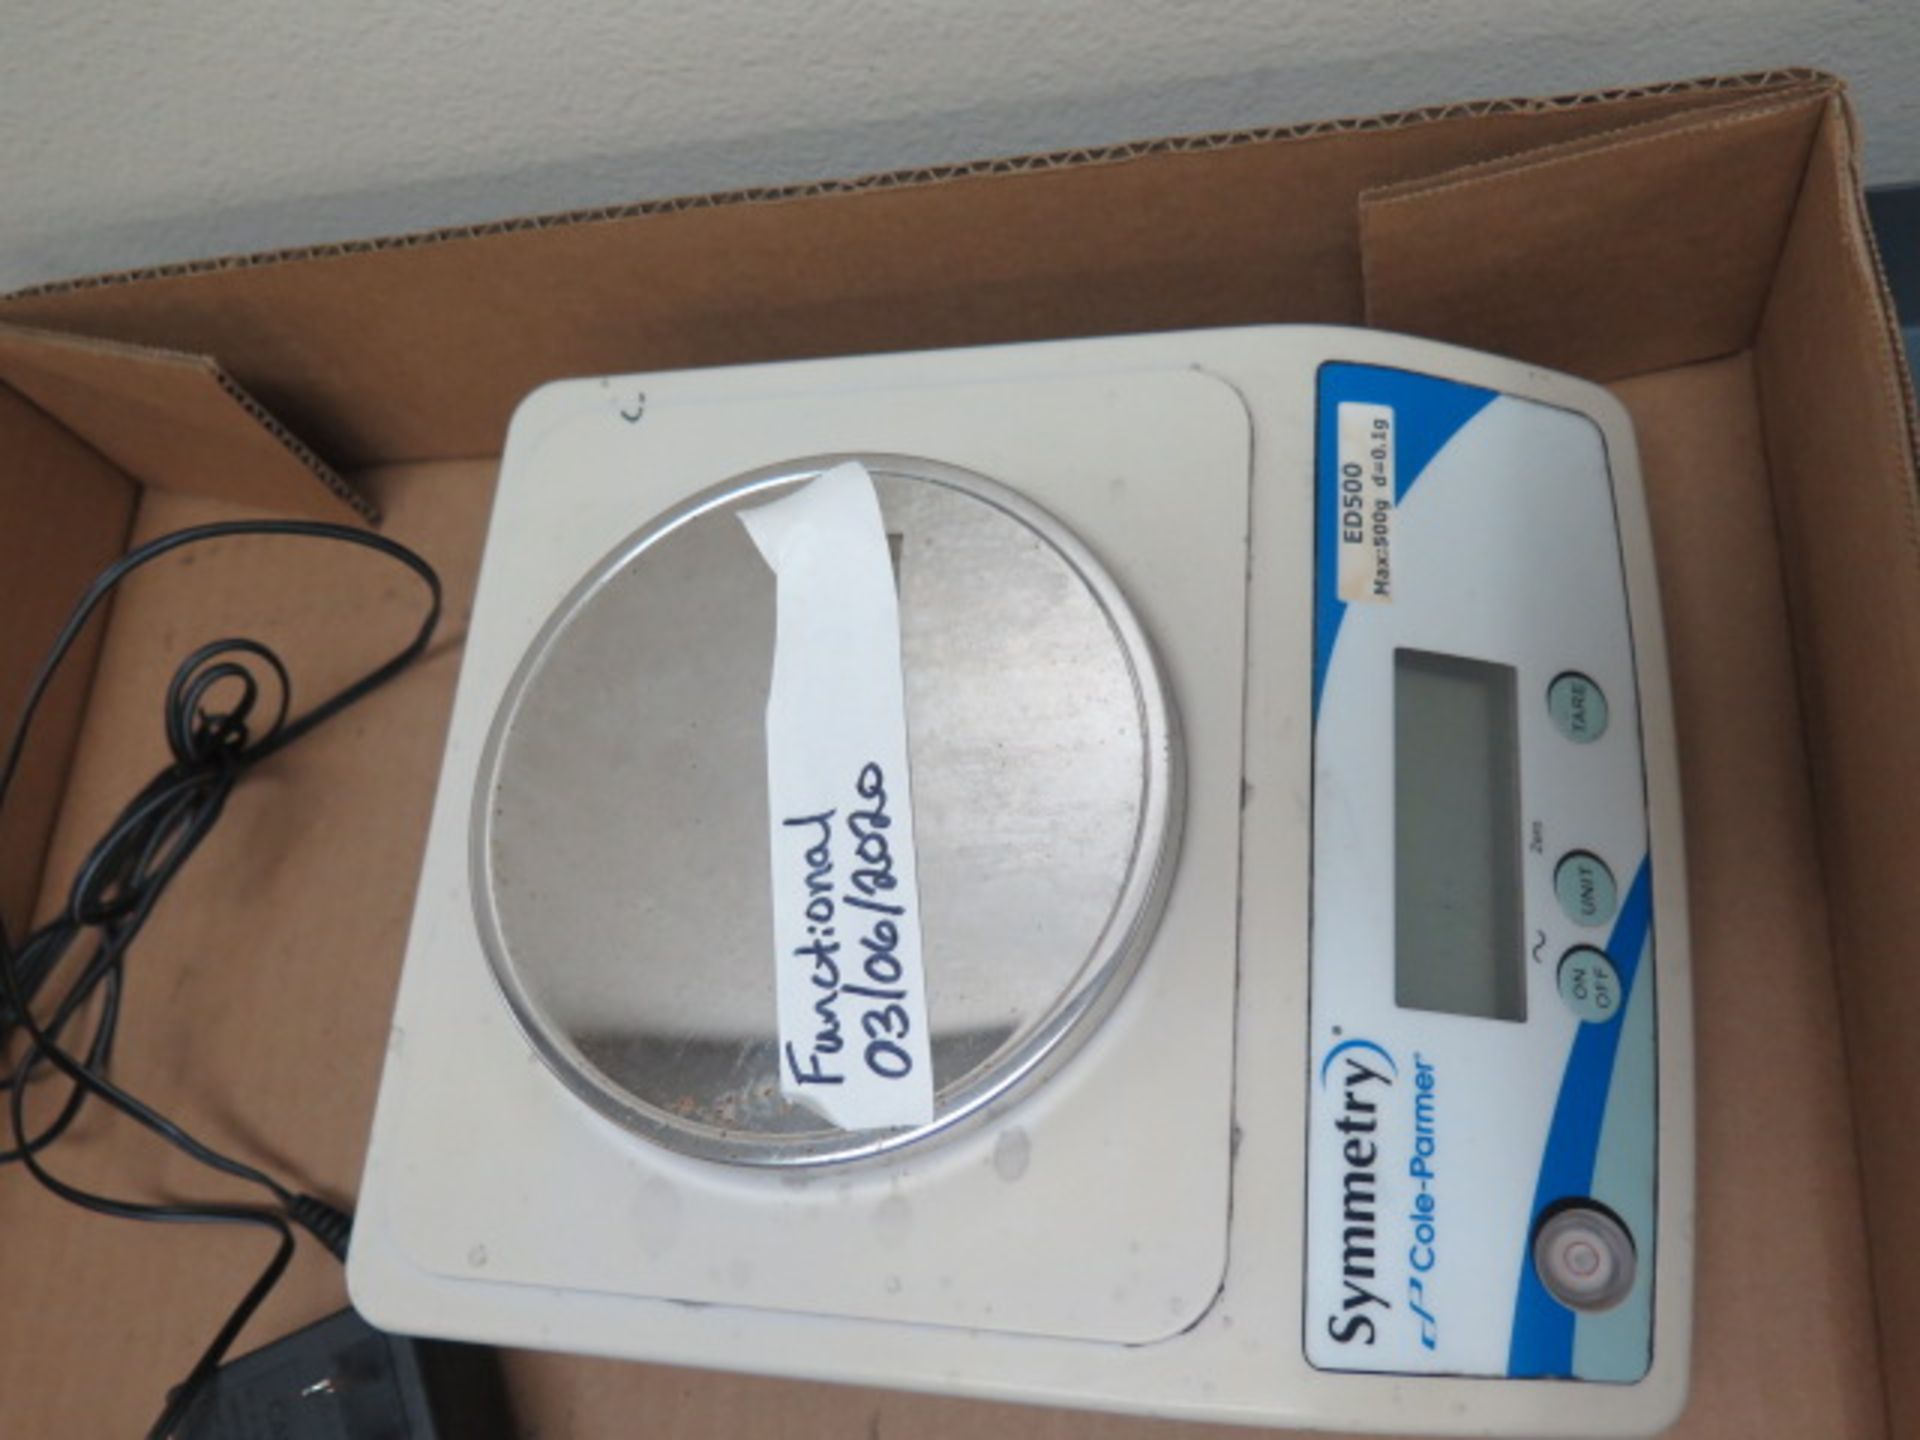 Cole-Parmer Symmetry ED500 500g Digital Scale to 0.1g - Image 2 of 3